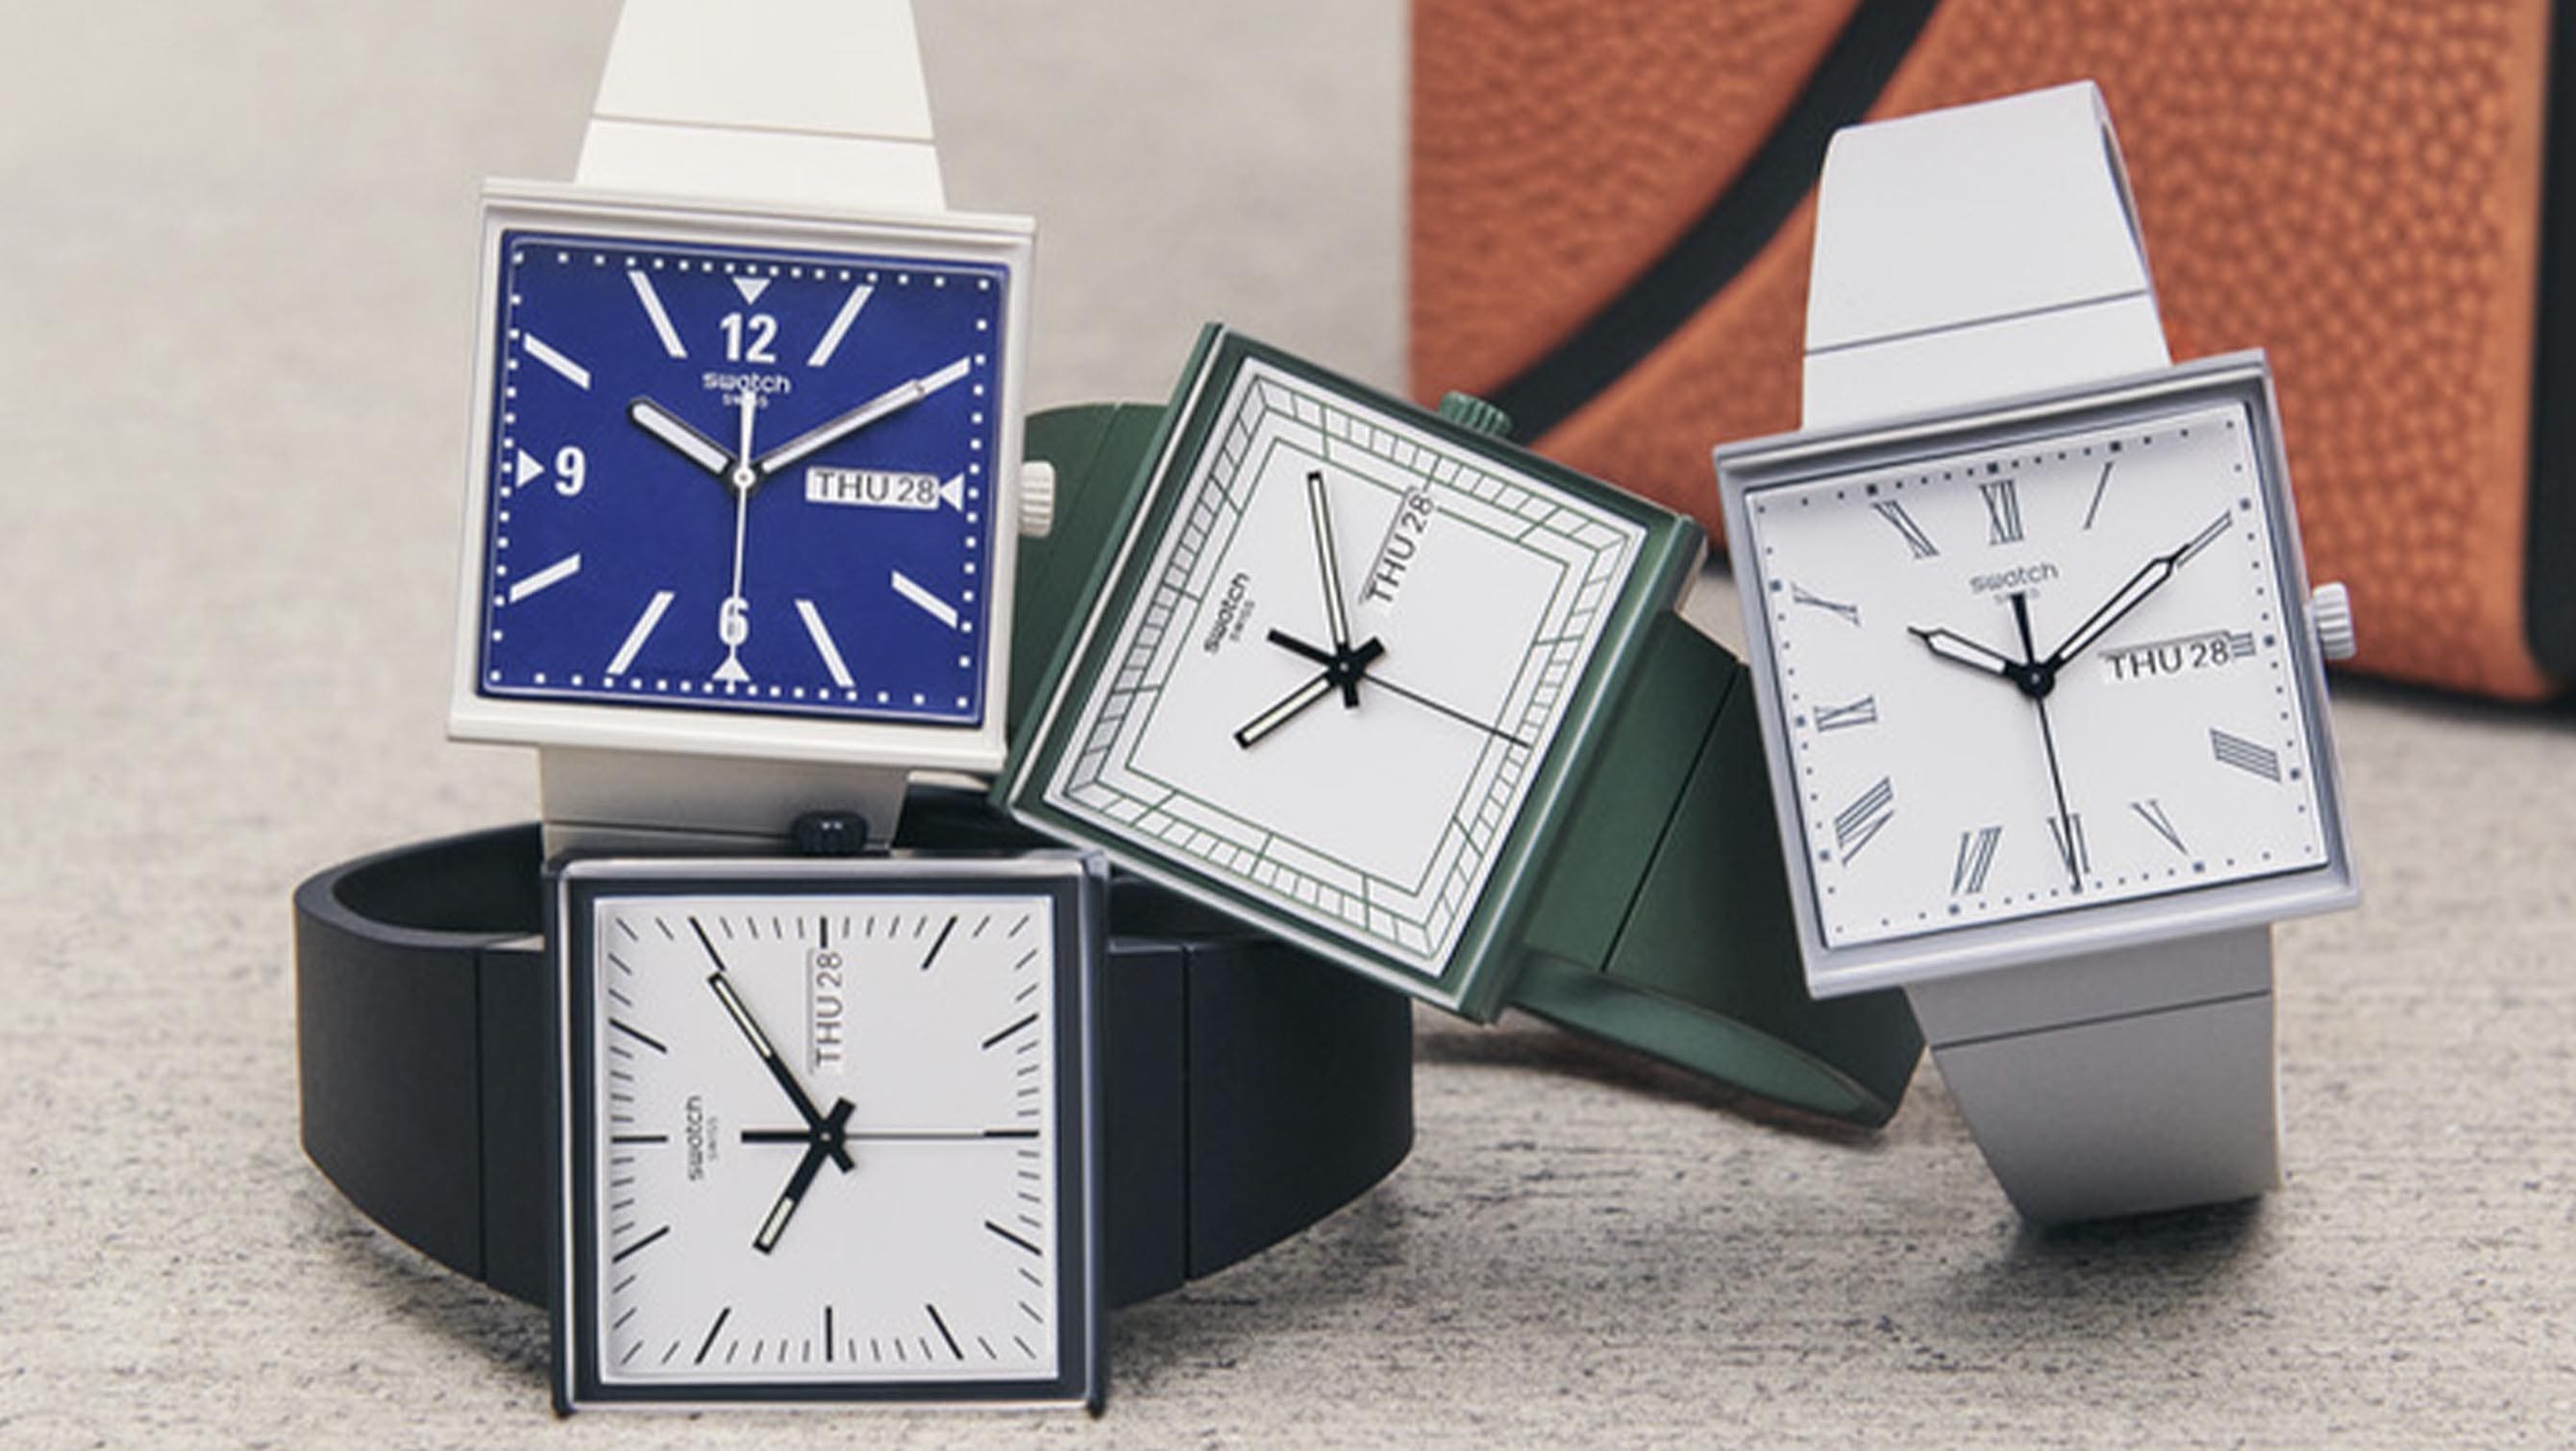 The new Swatch Bioceramic What If? collection reimagines their round 1983 debut as square